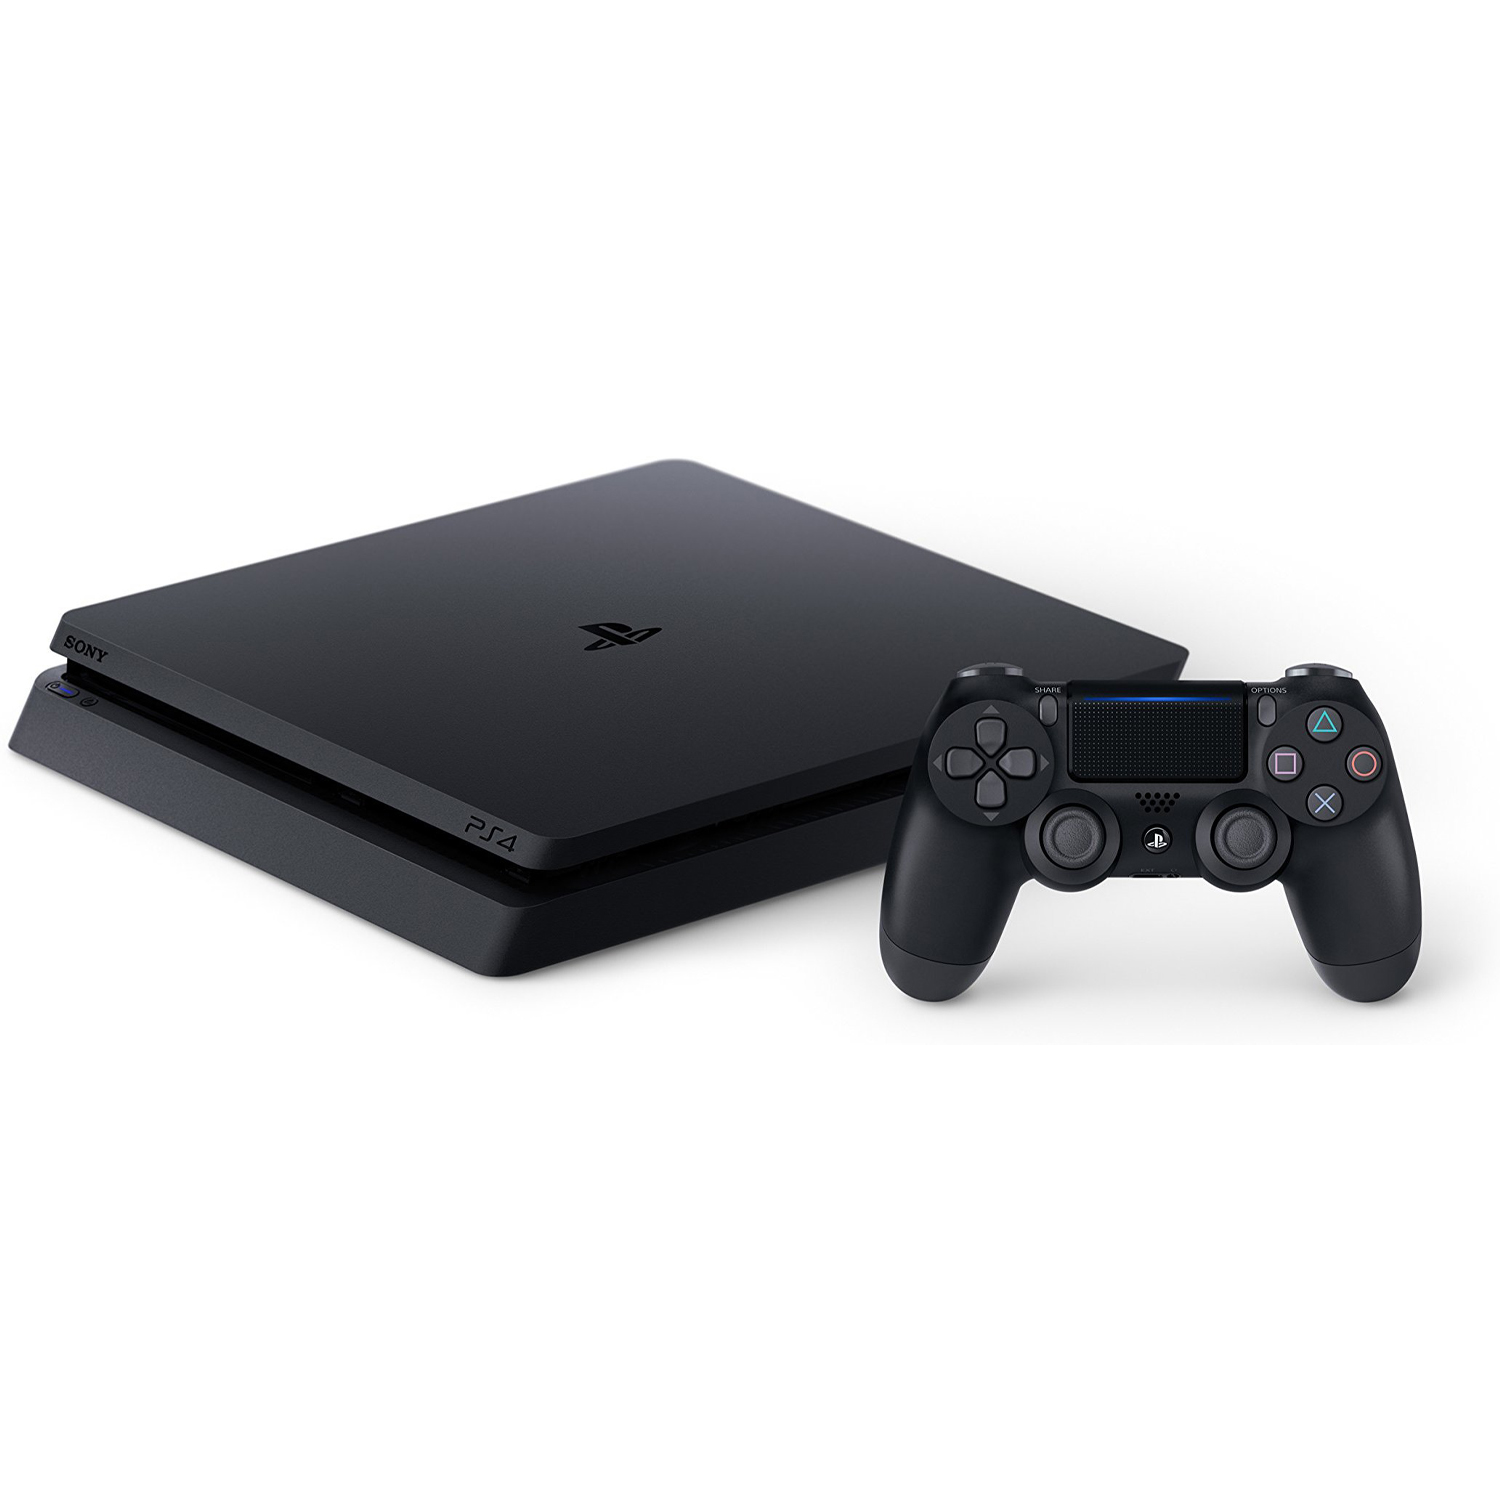 Sony PlayStation 4 Slim 500GB Gaming Console, Black, CUH-2115A - image 1 of 7